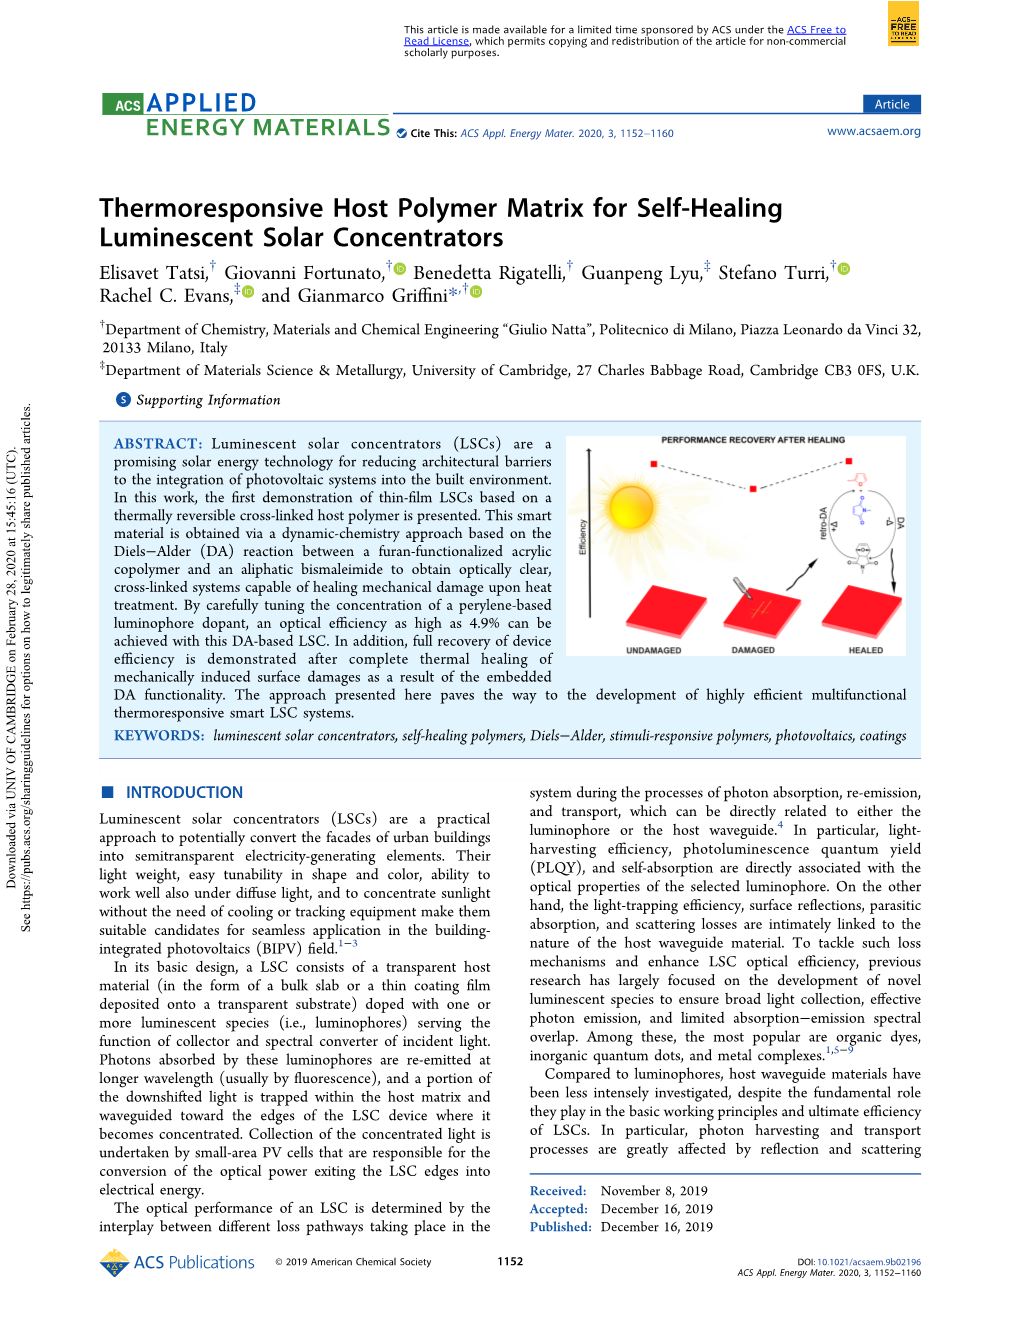 Thermoresponsive Host Polymer Matrix for Self-Healing Luminescent